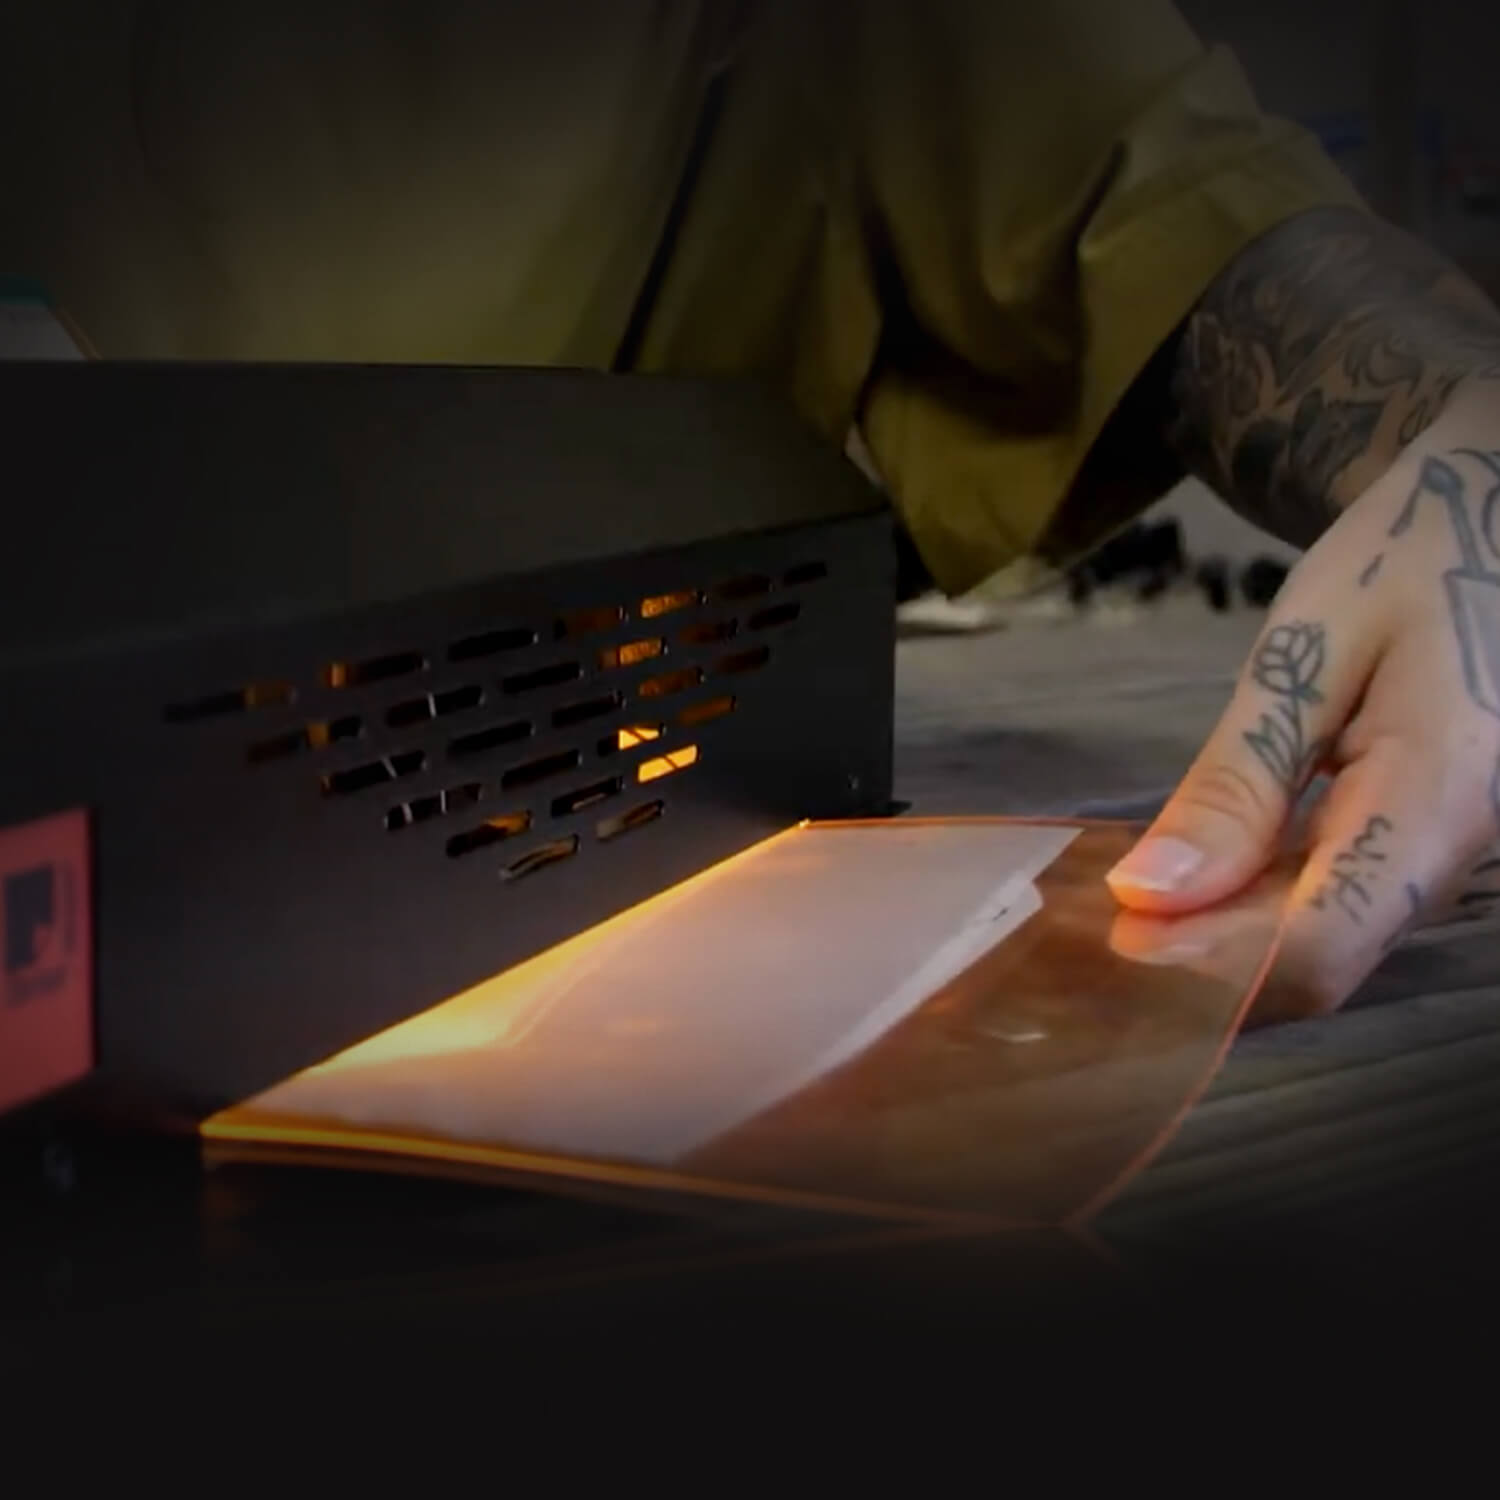 Prime Tattoo Thermal Transfer Paper is compatible with all thermal transfer paper printers